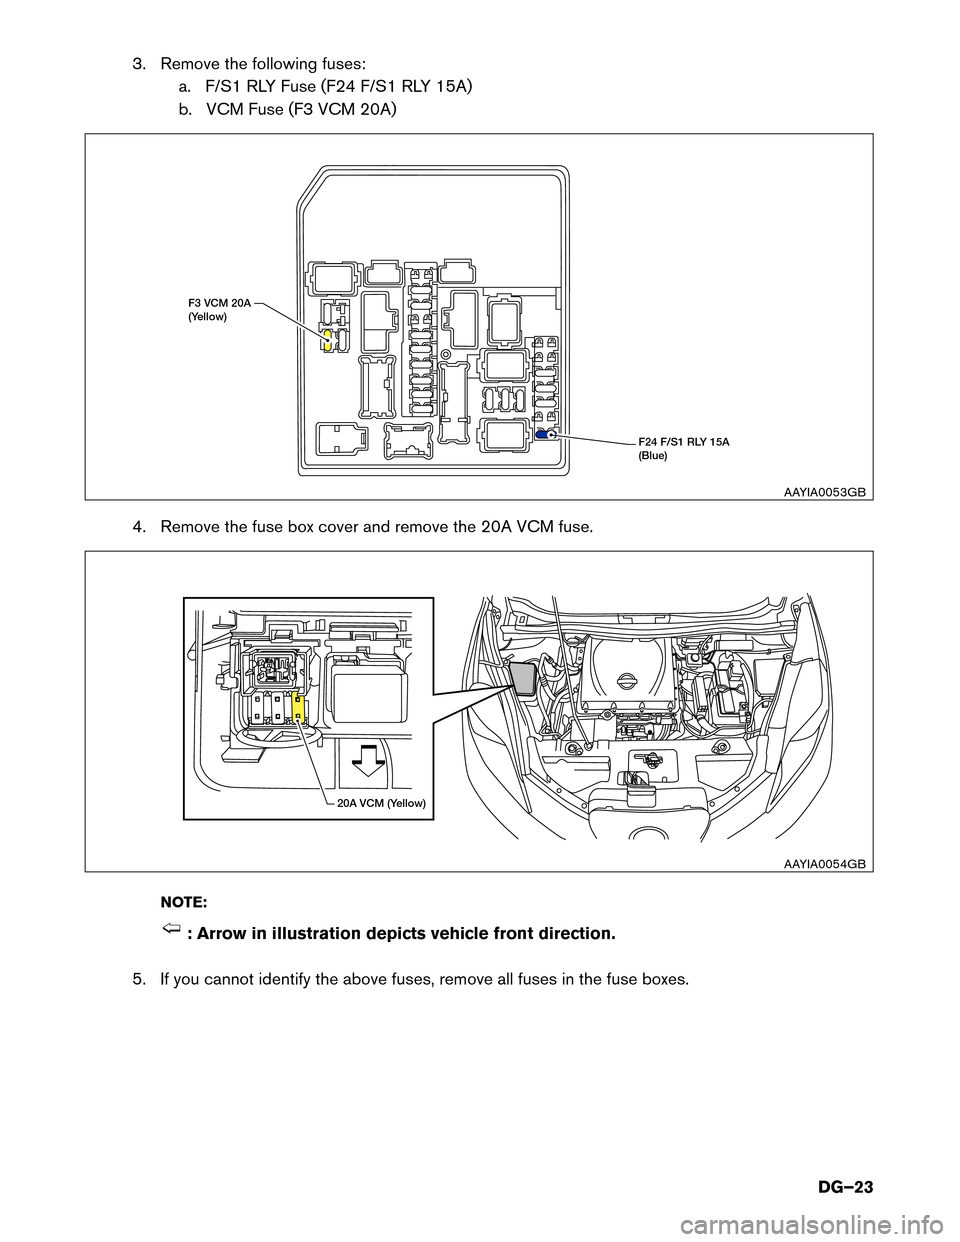 NISSAN LEAF 2016 1.G Dismantling Guide 3. Remove the following fuses:
a. F/S1 RLY Fuse (F24 F/S1 RLY 15A)
b. VCM Fuse (F3 VCM 20A)
4. Remove the fuse box cover and remove the 20A VCM fuse. NOTE: : Arrow in illustration depicts vehicle fron